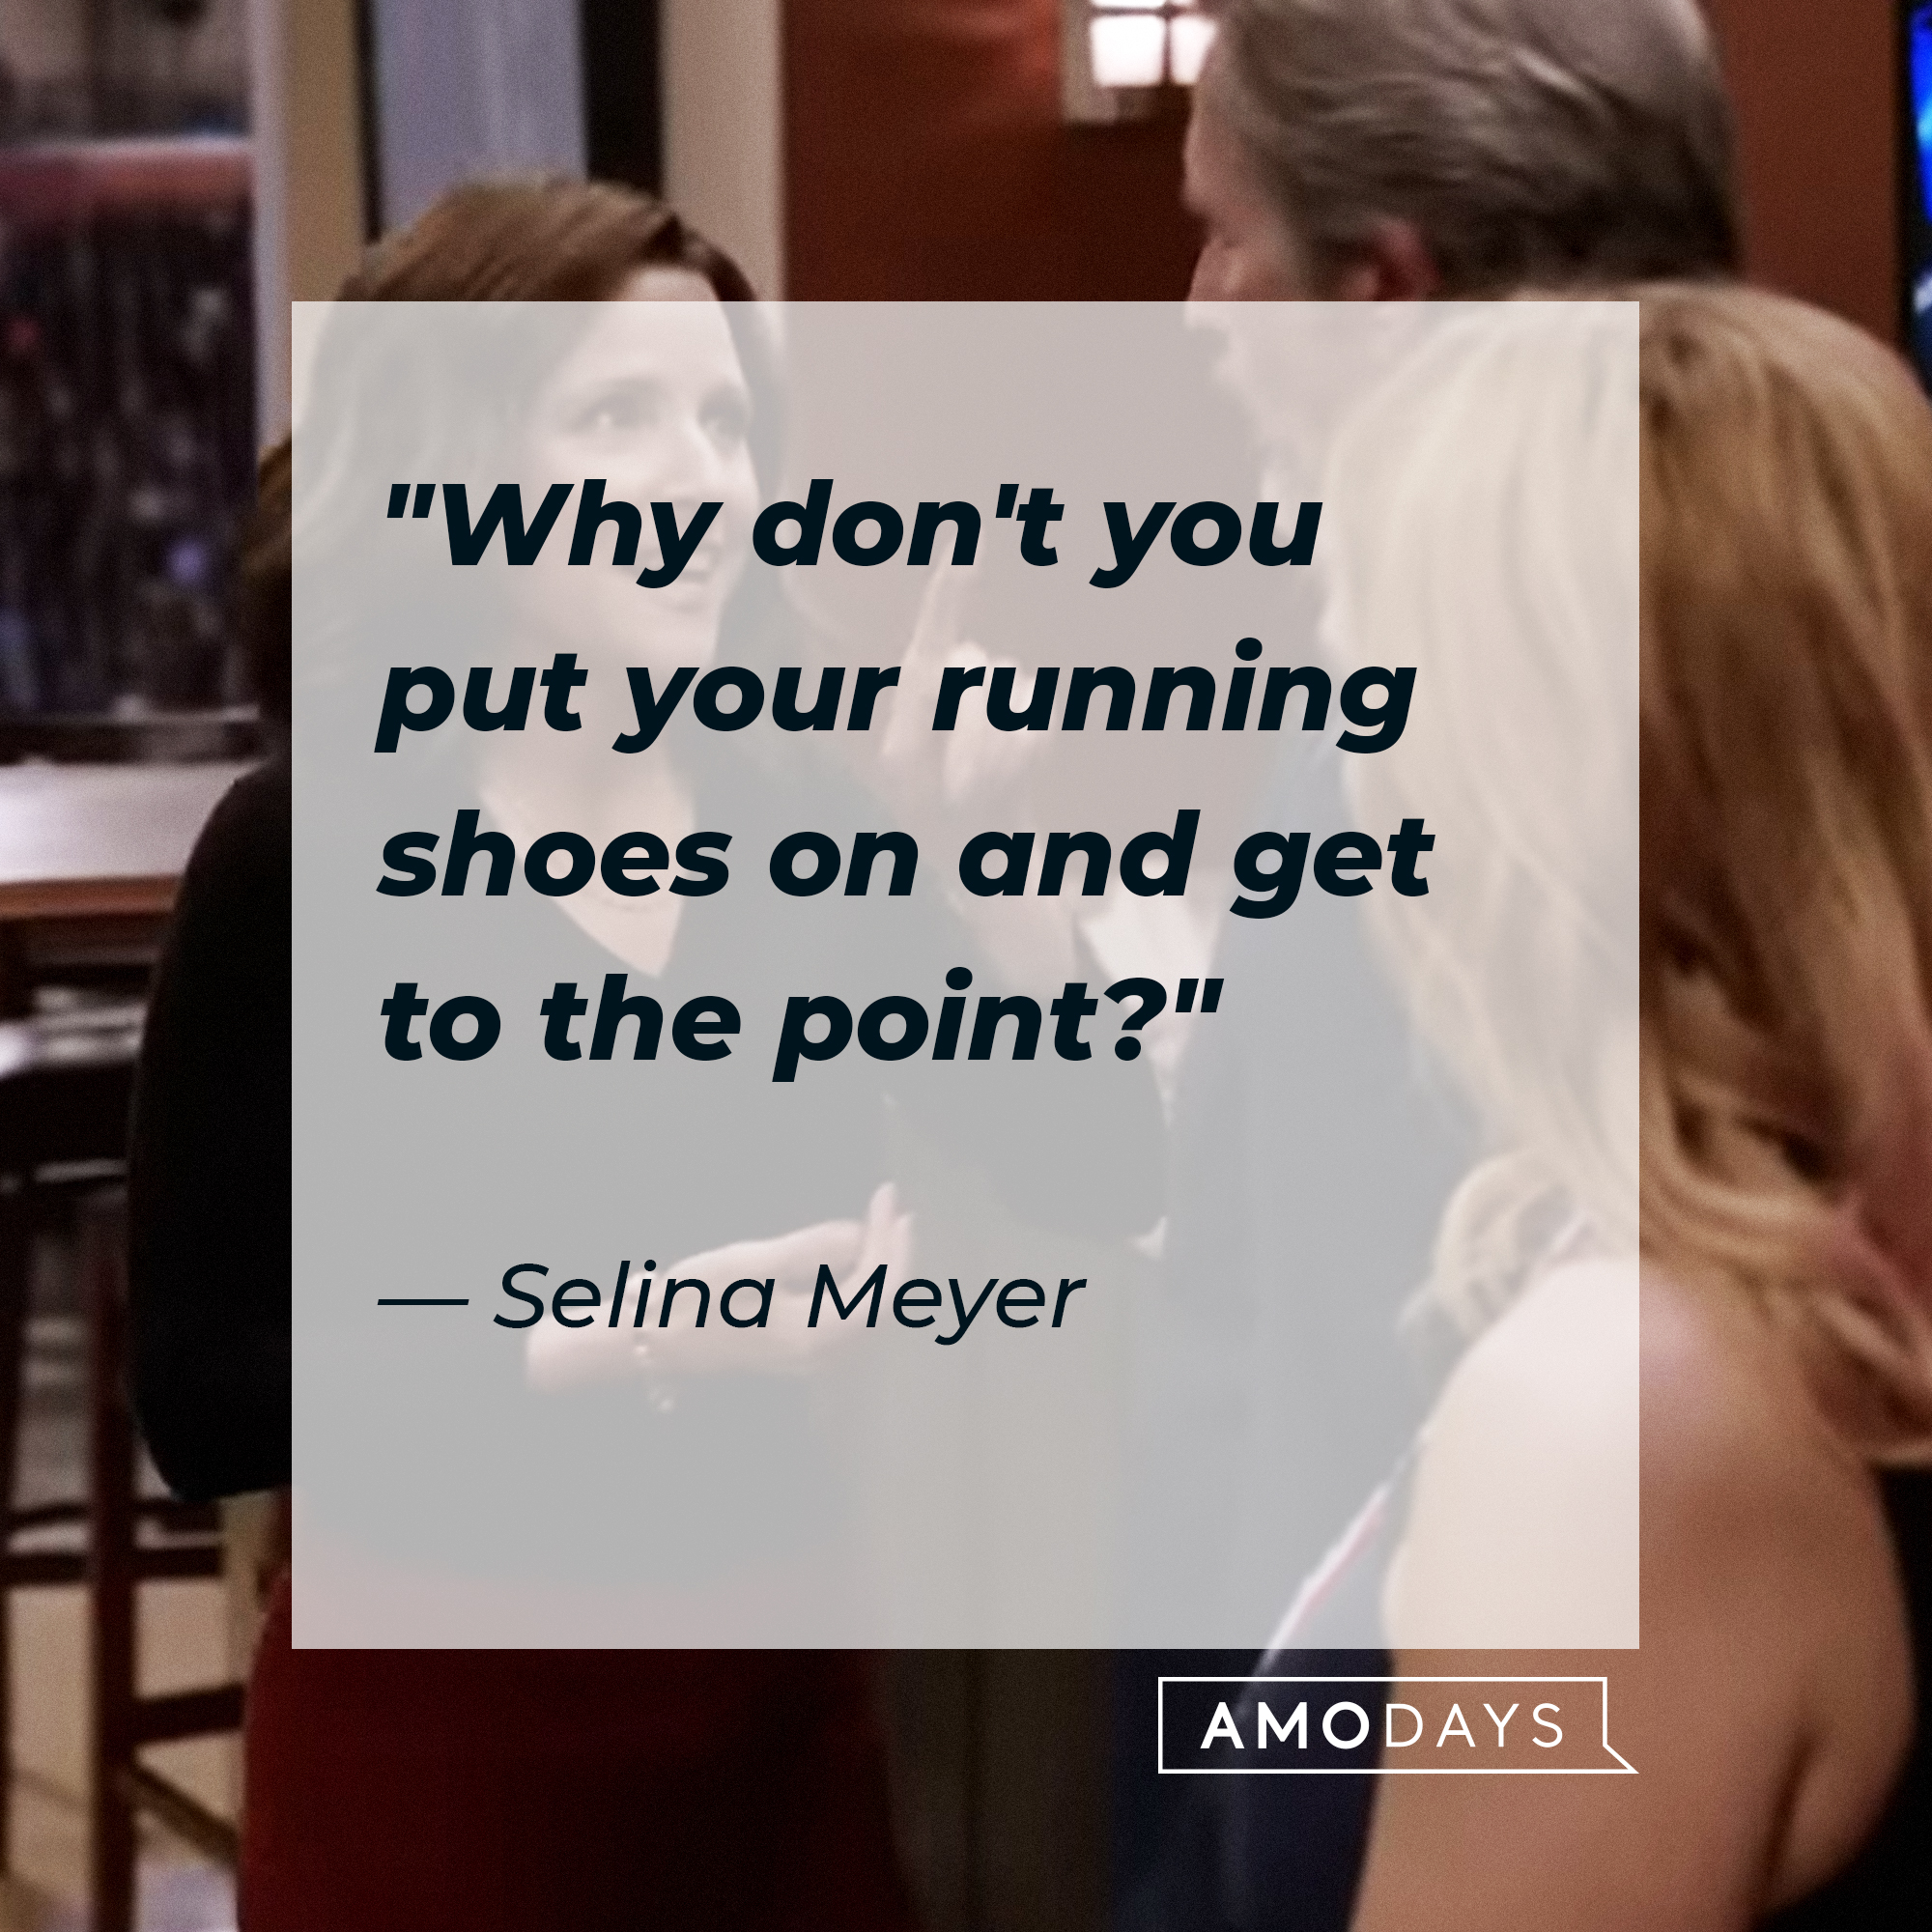 Selina Meyer, with other characters from “Veep” and her quote: "Why don't you put your running shoes on and get to the point?" │Source: youtube.com / Max